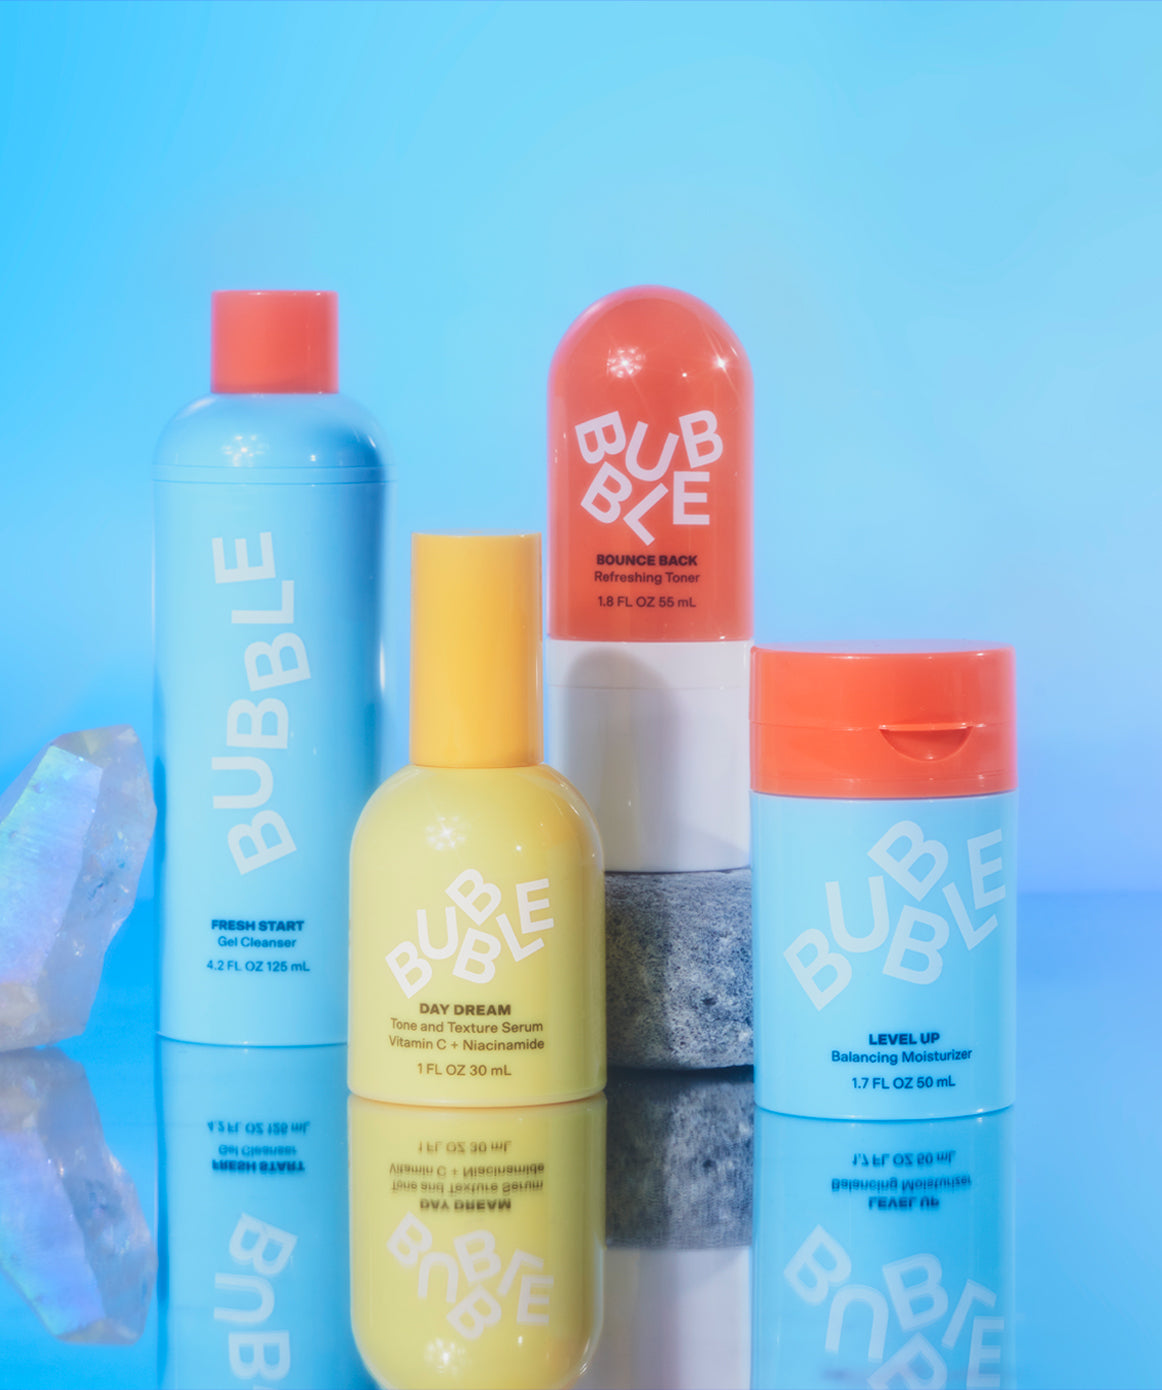 It's more than just skin-deep: Feel and look amazing with Bubble Skincare, Sponsored